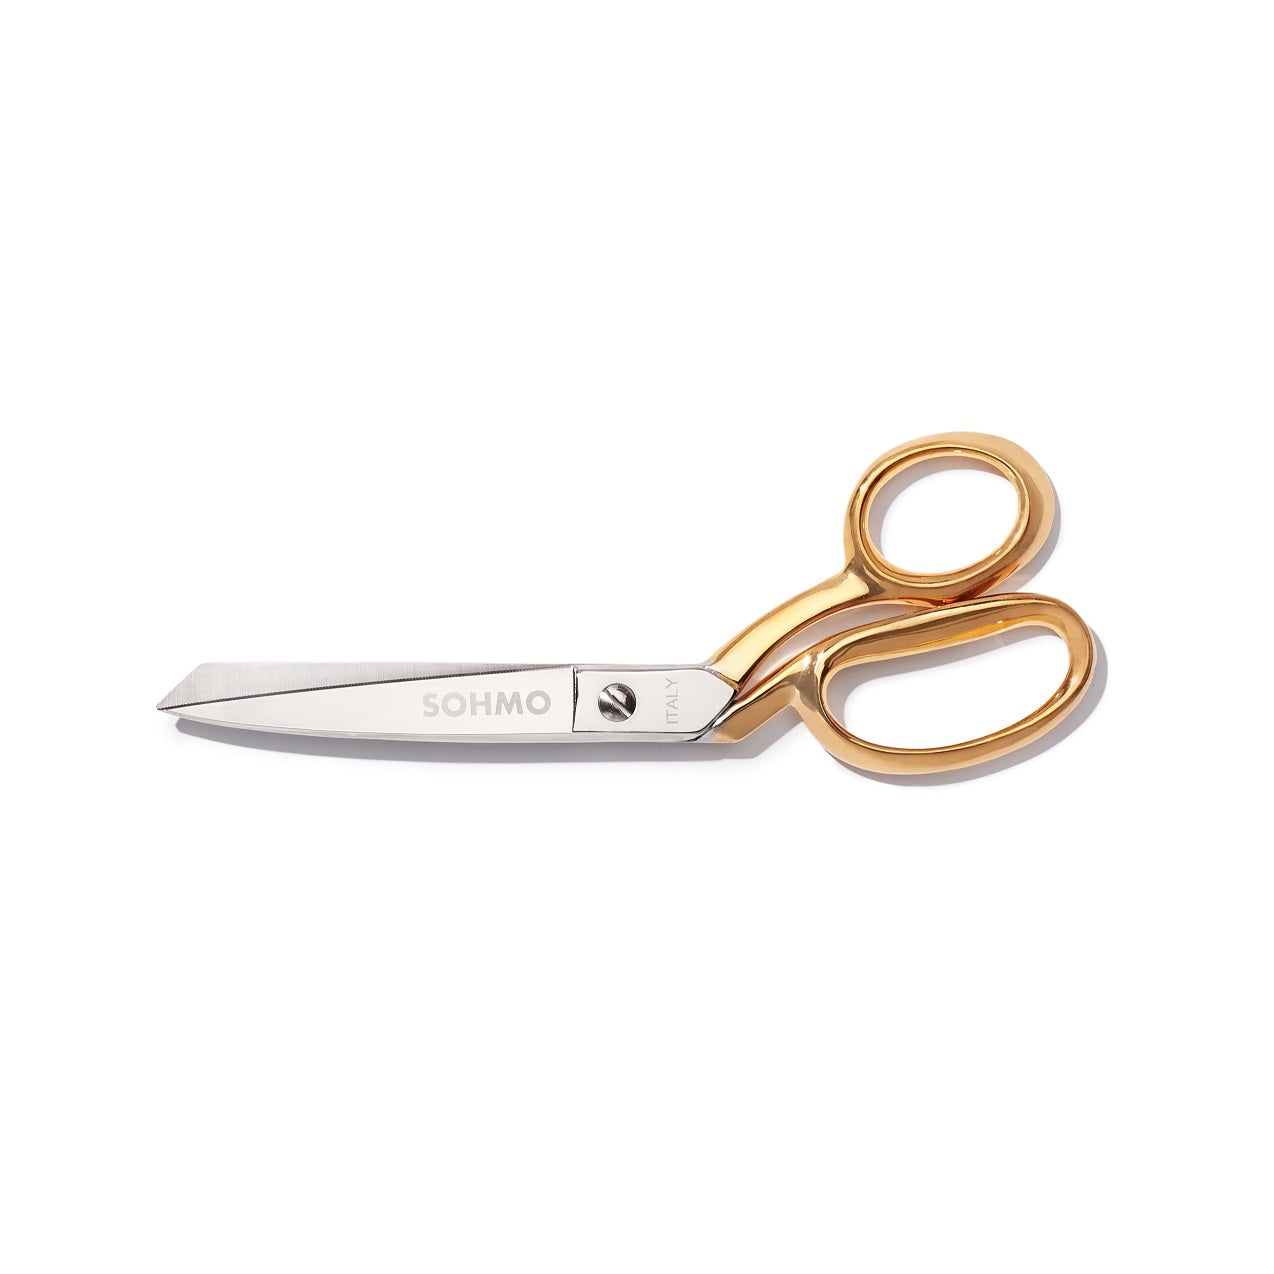 SOHMO 8" Tailoring Shears with gold plated handles